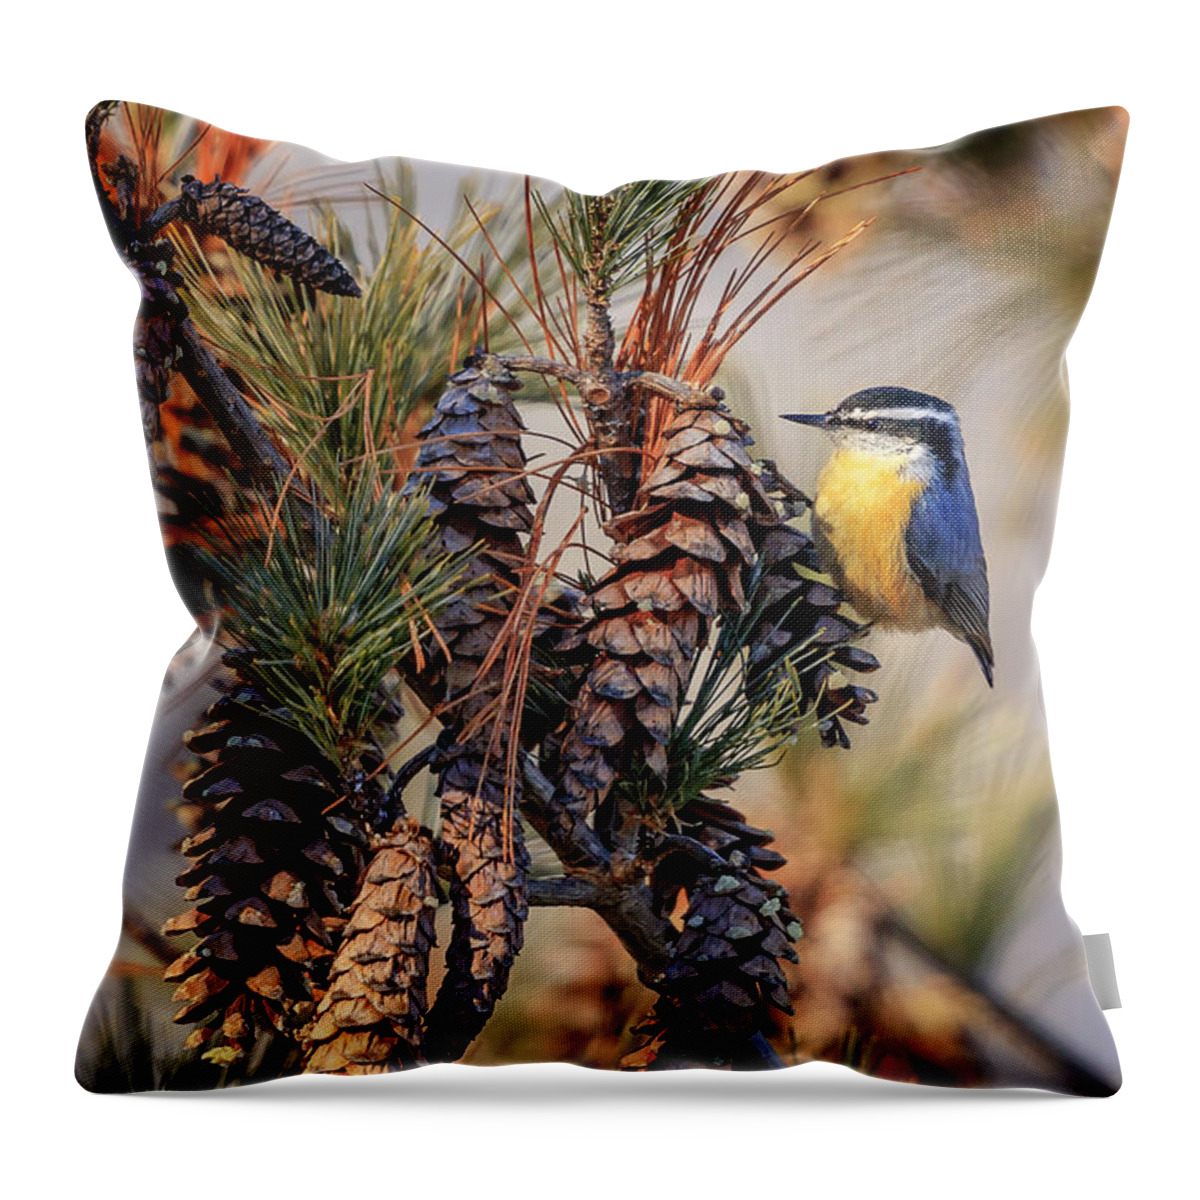 Adorable Throw Pillow featuring the photograph Black-capped Chickadee by Peter Lakomy